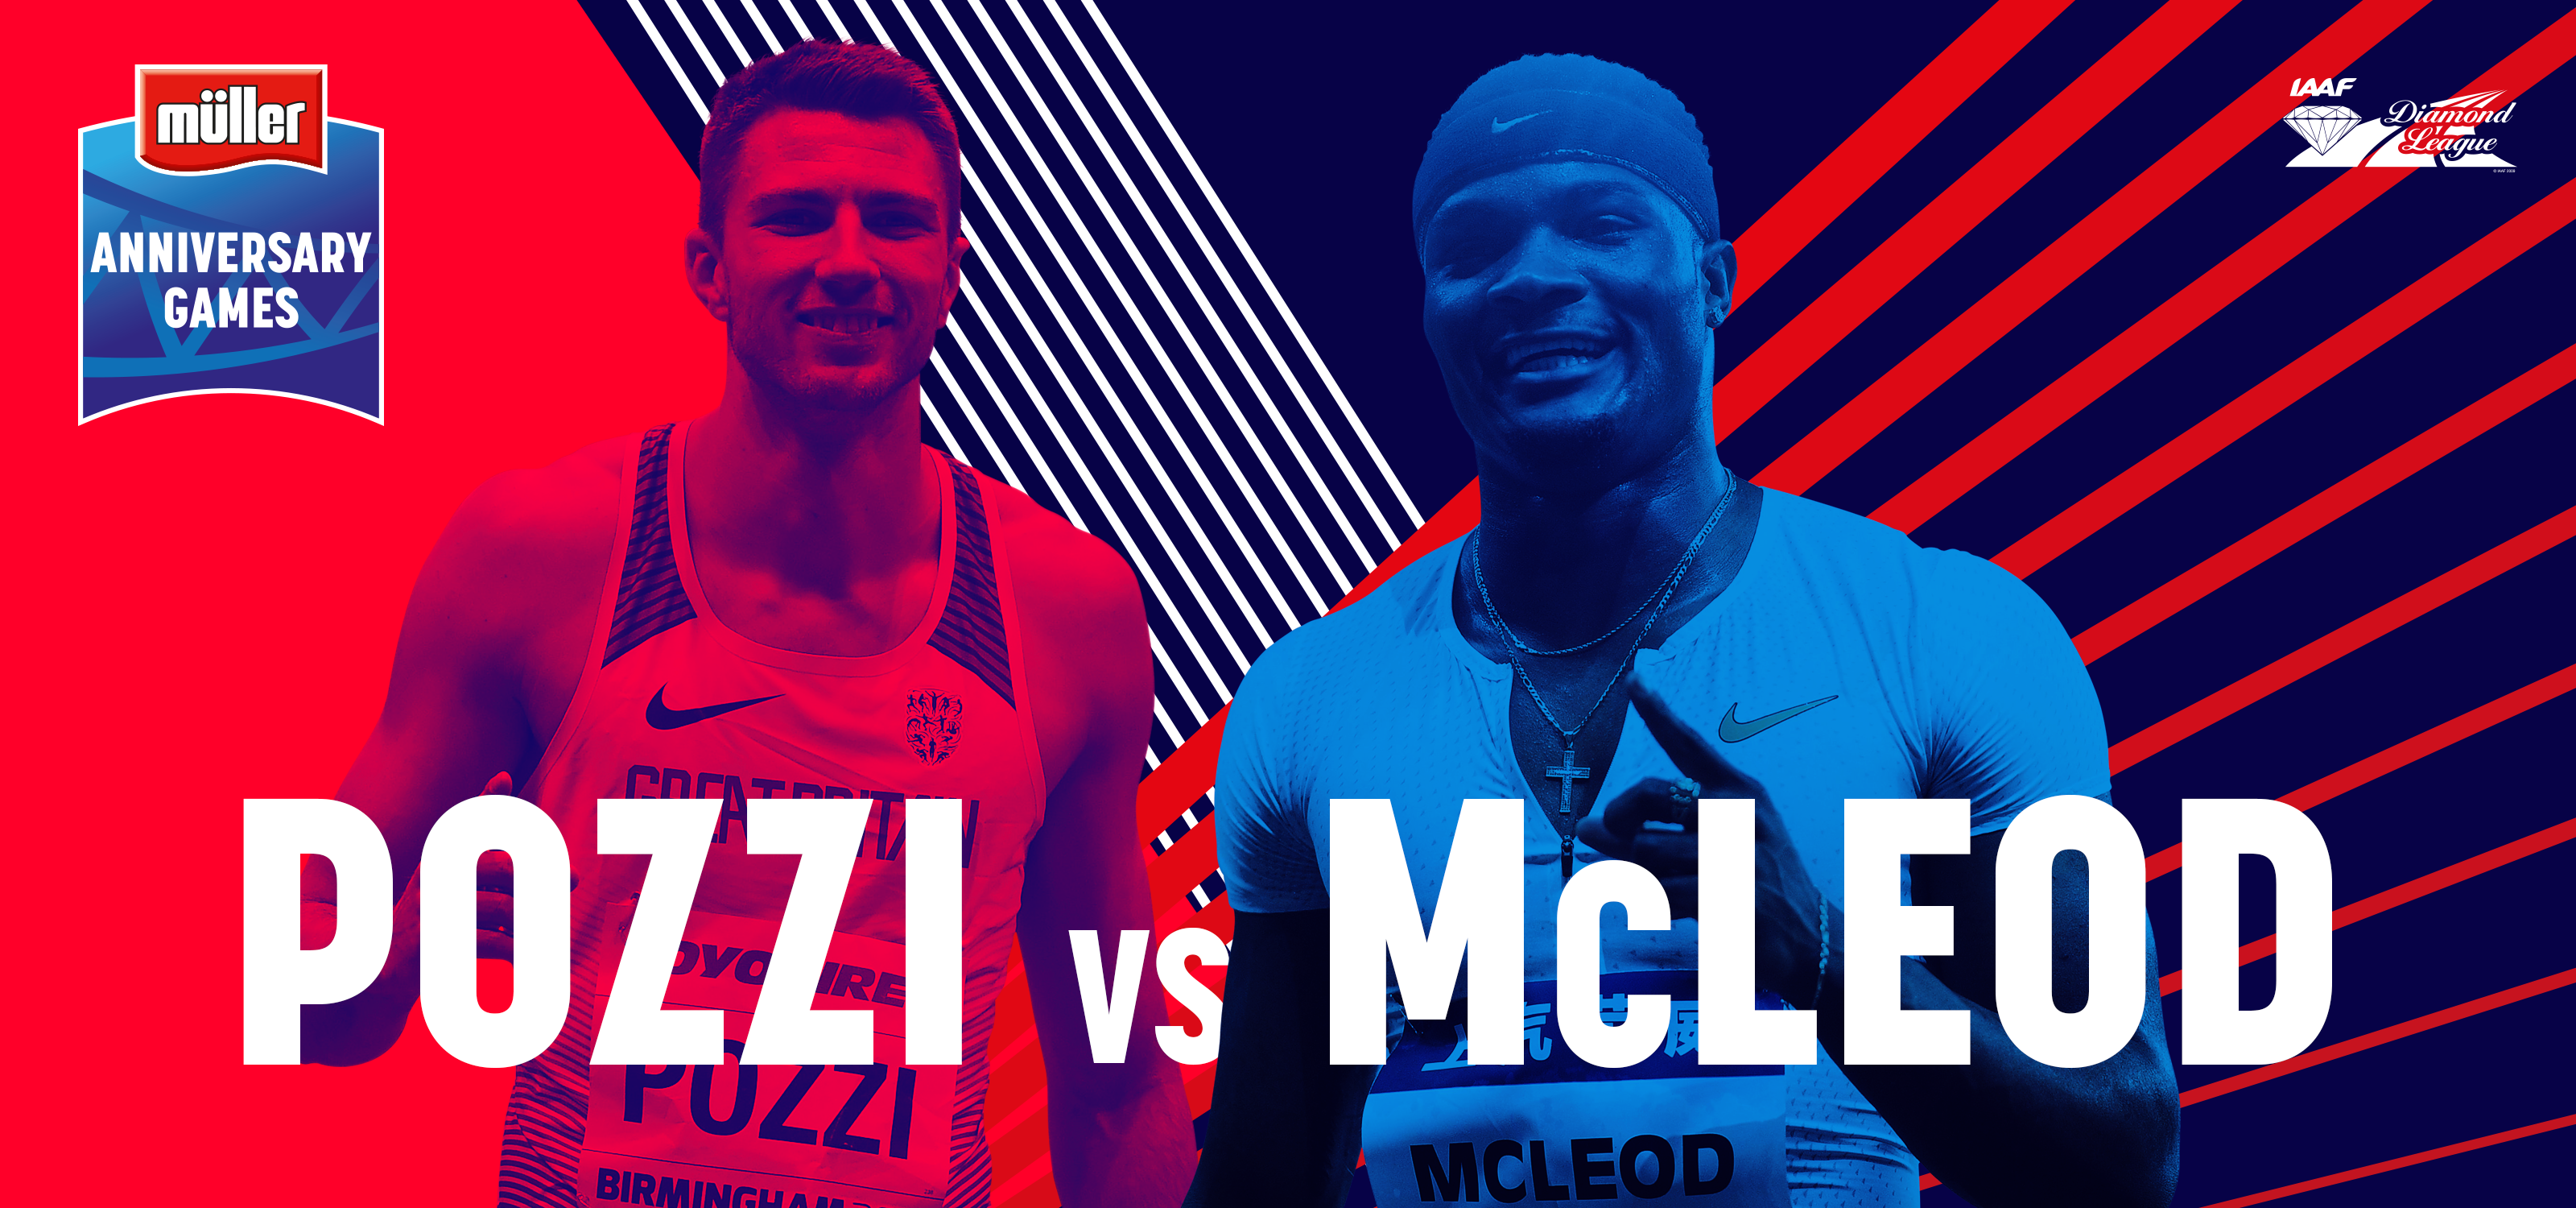 POZZI AND MCLEOD TO FACE OFF IN PRE-WORLD CHAMPIONSHIPS HURDLES CLASH AT ANNIVERSARY GAMES